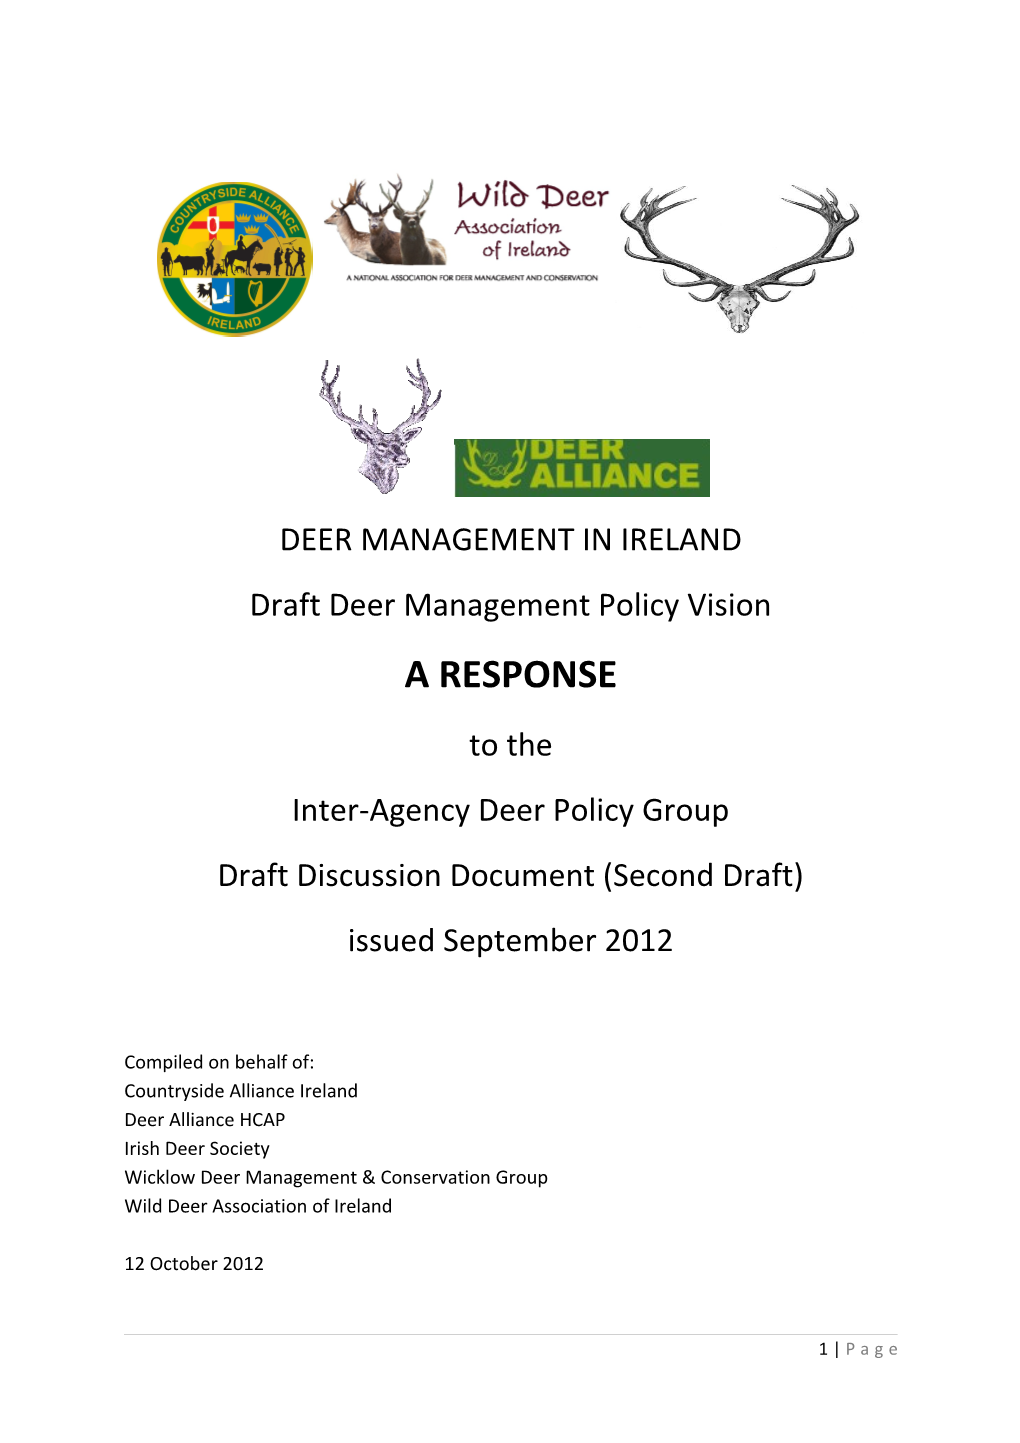 Draft Deer Management Policy Vision